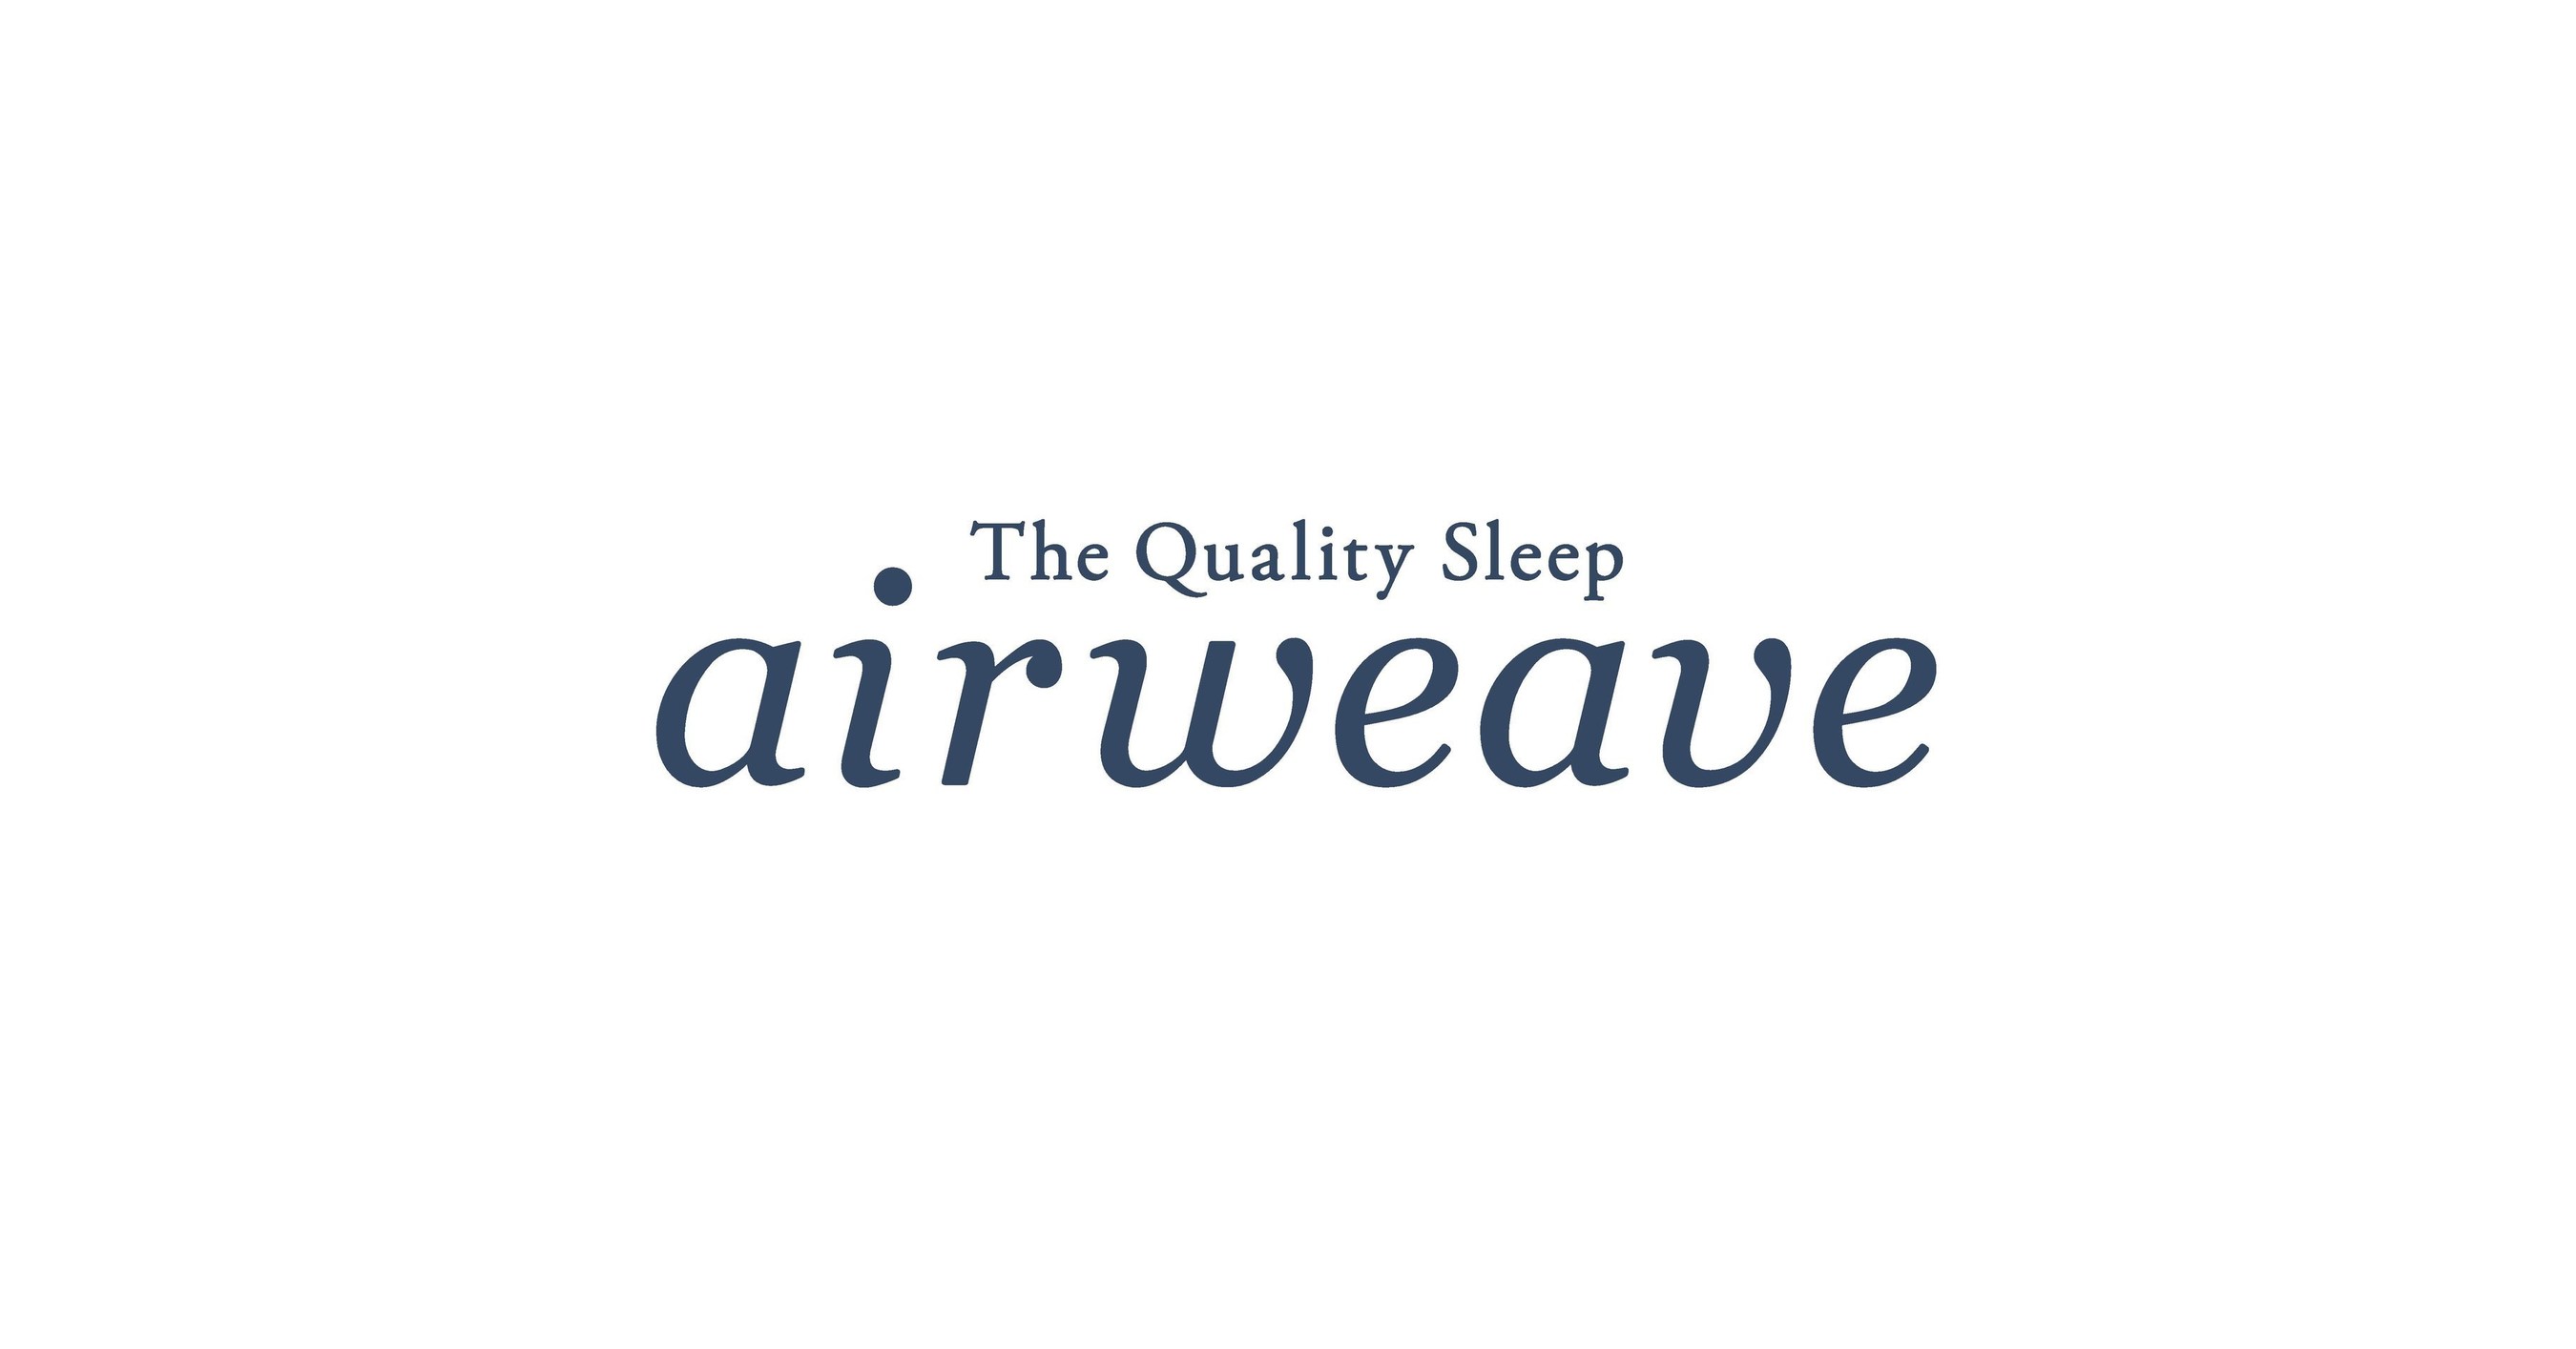 airweave High Rebound Bedding Topper Improves Youth Athletic Performance,  Study Shows